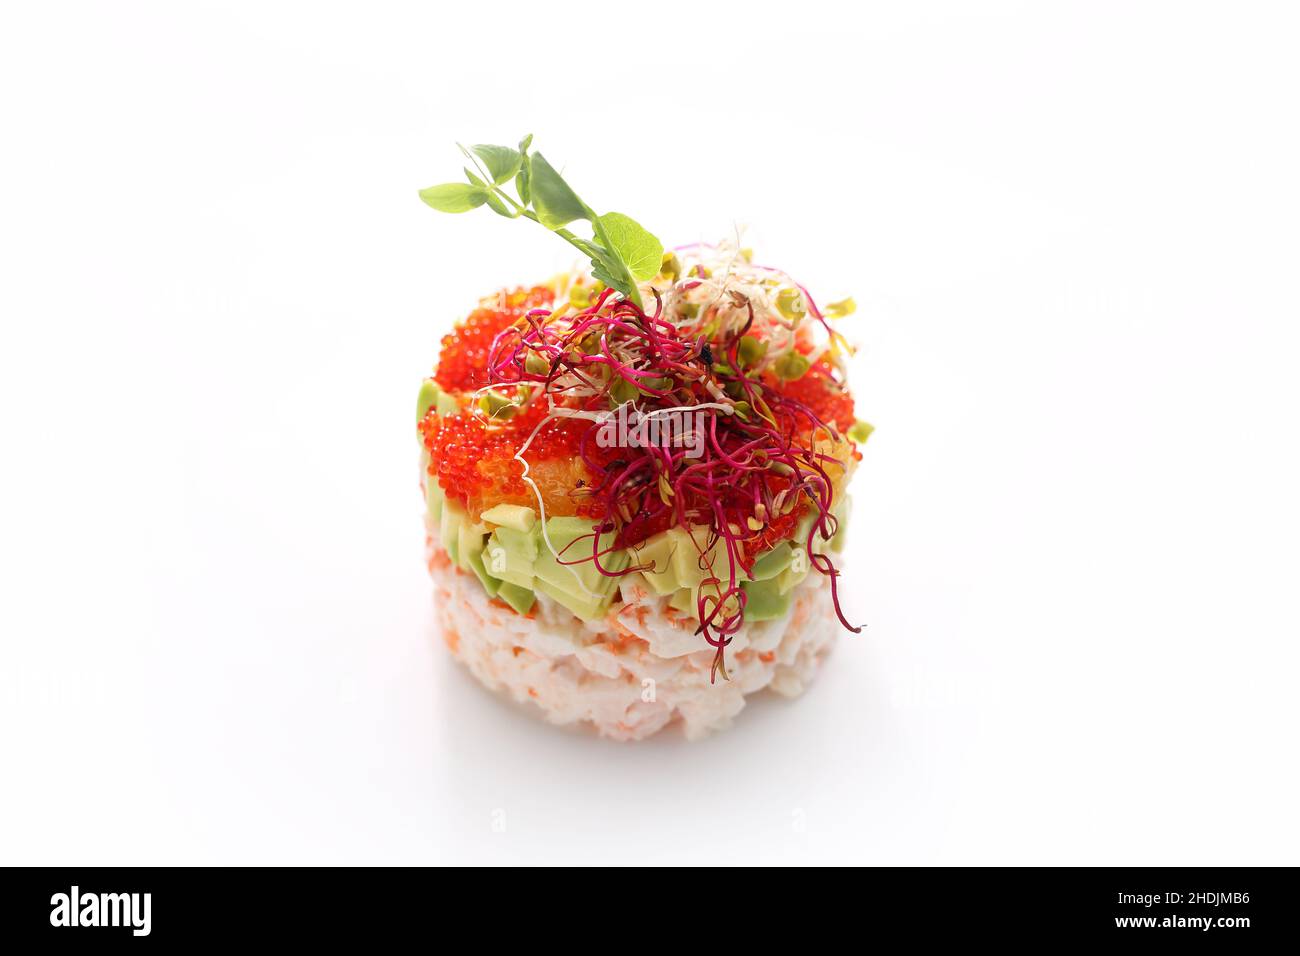 Chopped crab tartare with caviar and avocado. Fresh chopped fish salad. Traditional Japanese dish on a white background. Stock Photo